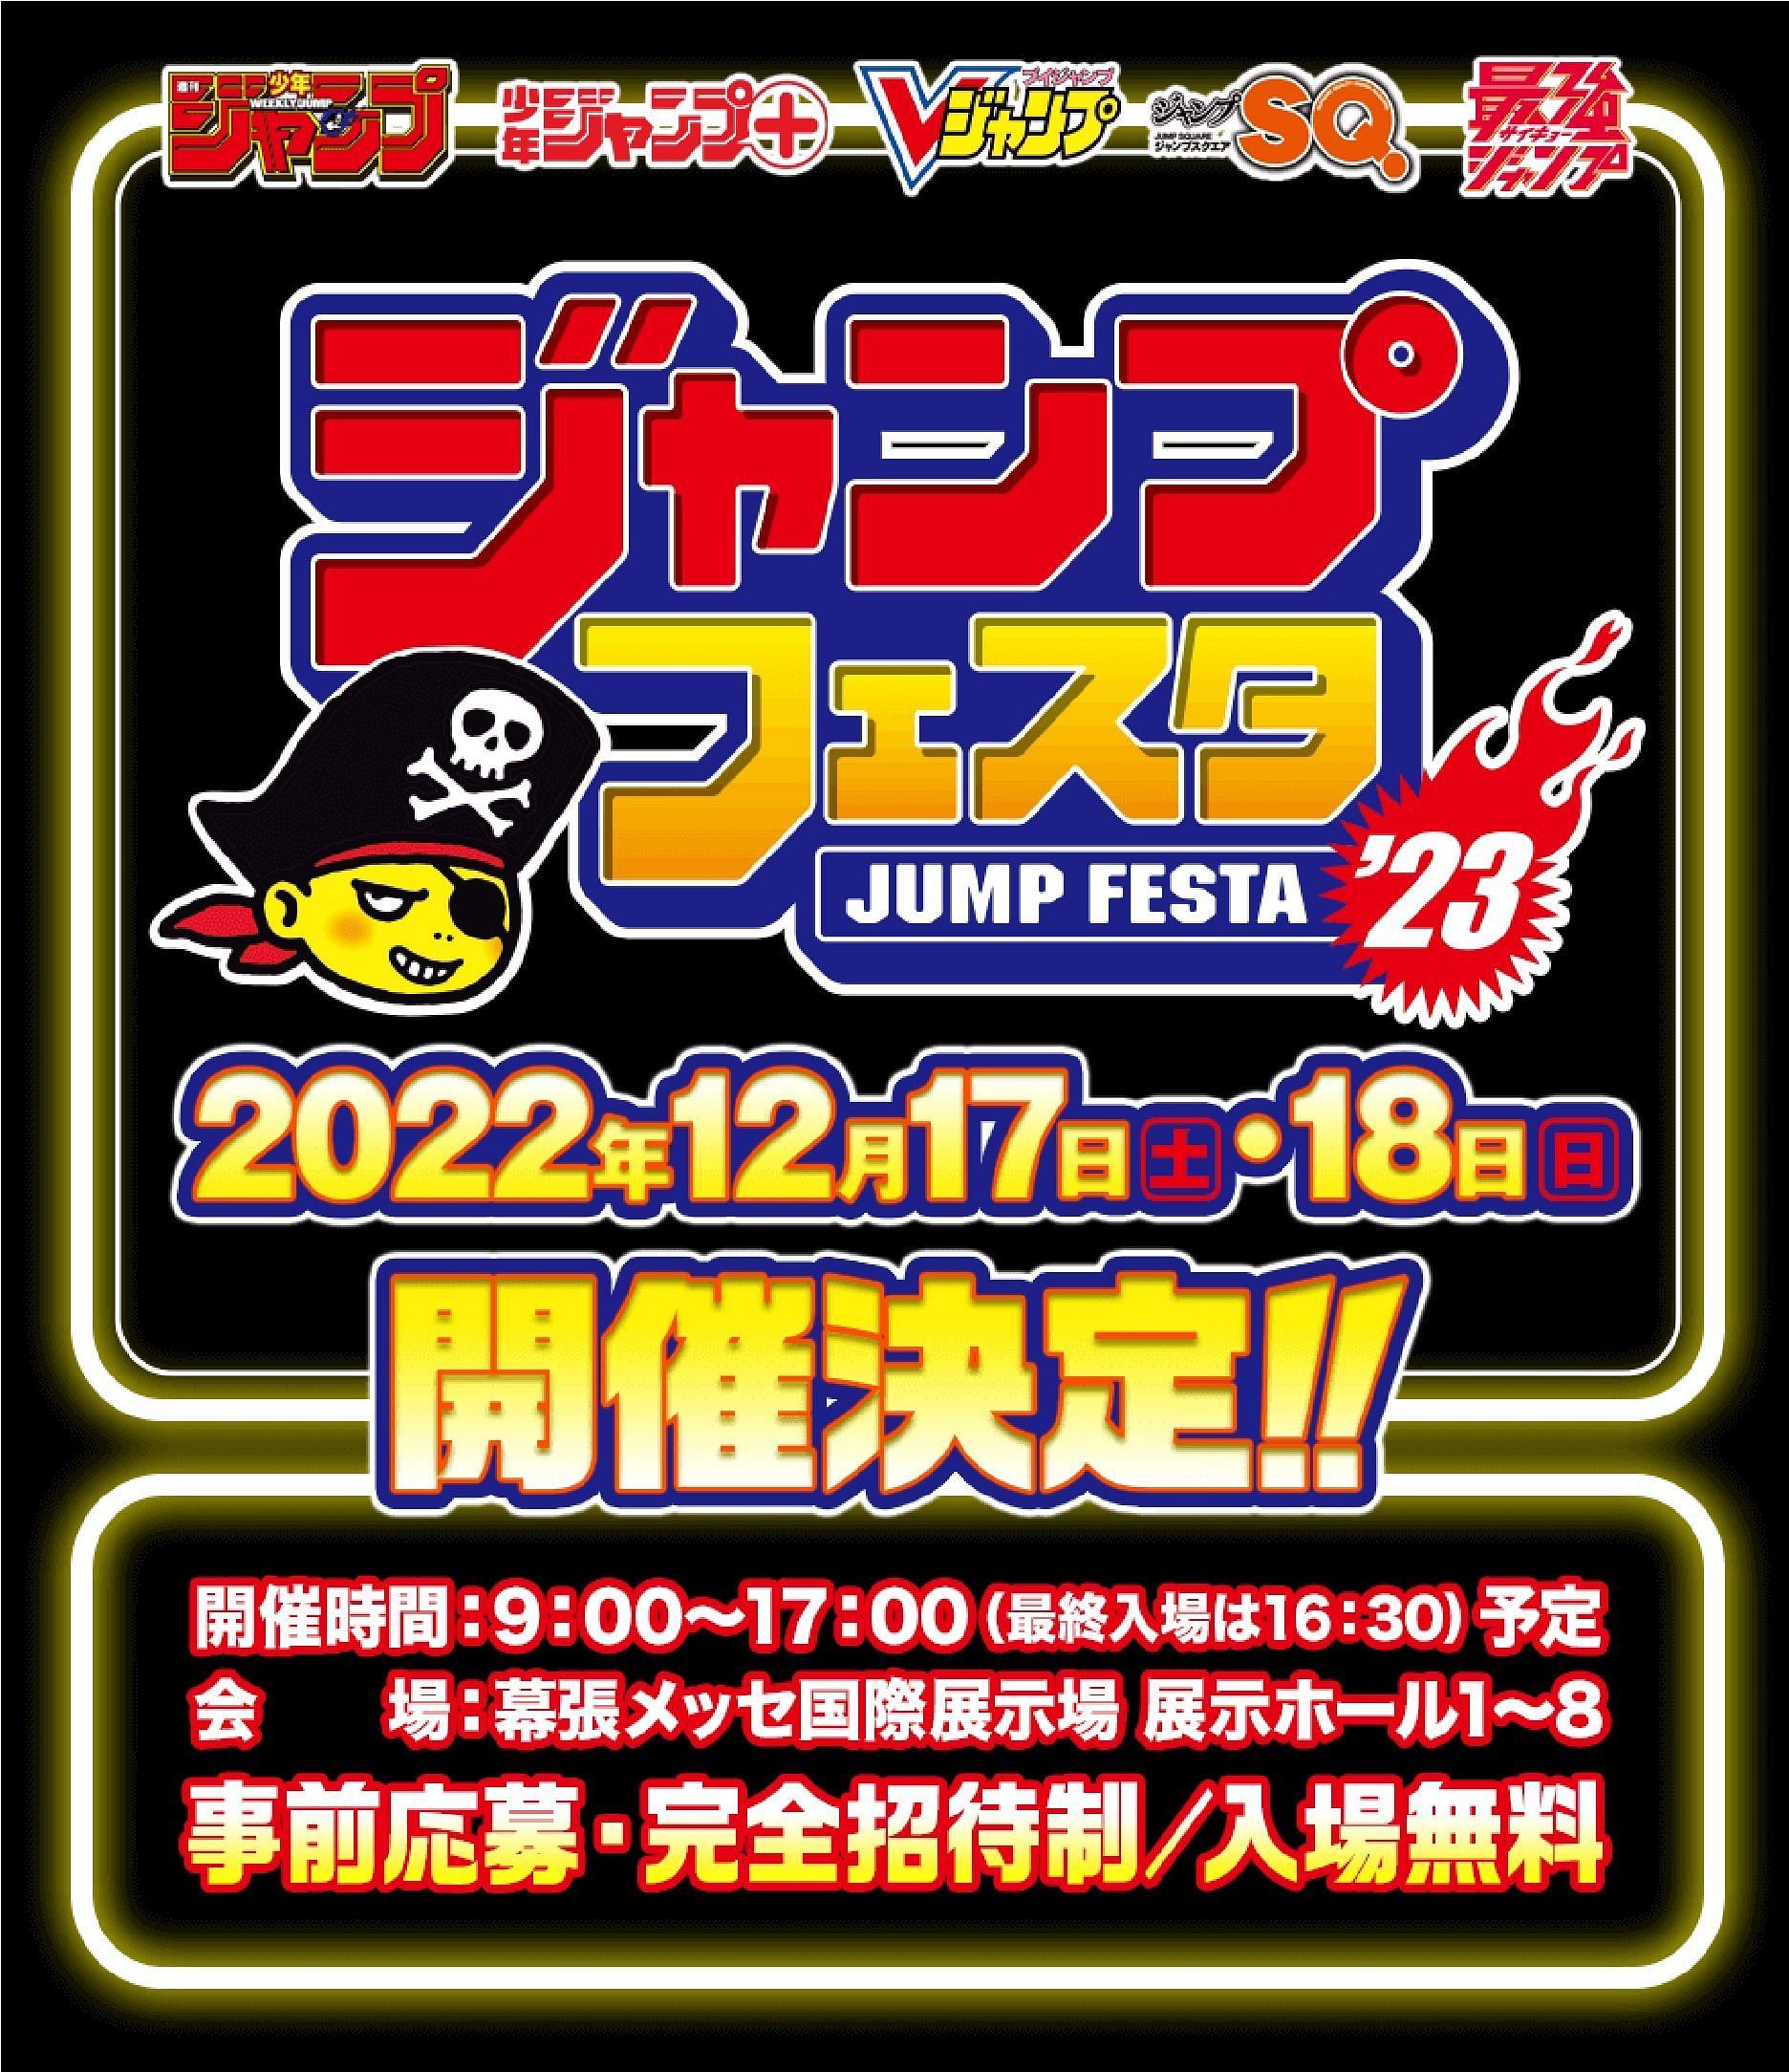 Black Clover, Bleach, and other Super Stages announced for Jump Festa 2023